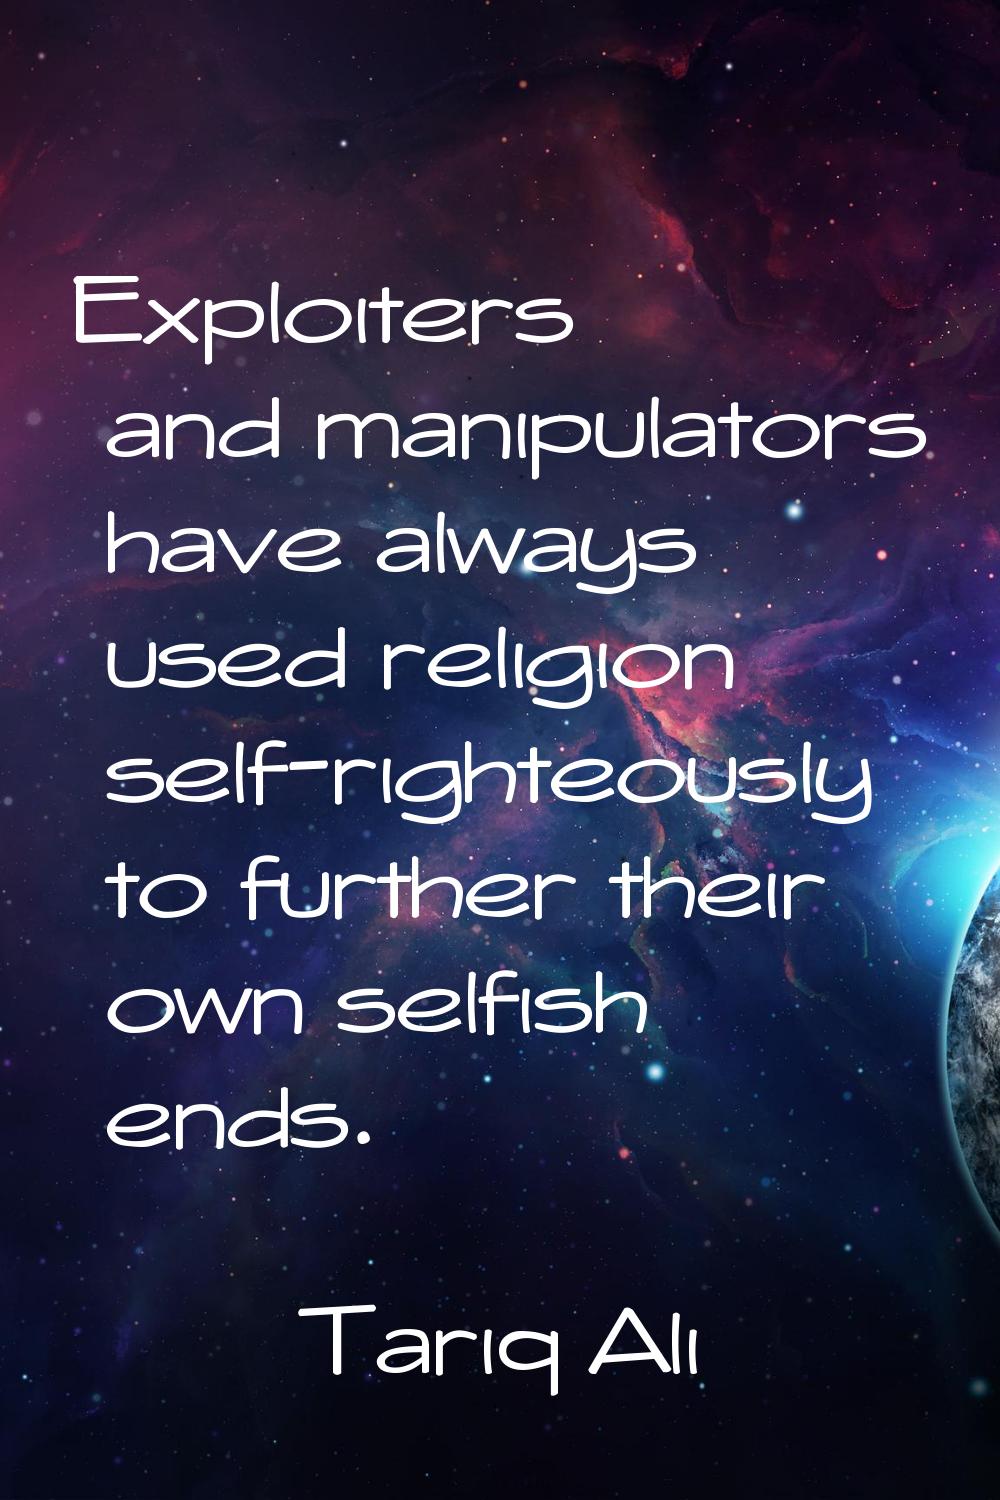 Exploiters and manipulators have always used religion self-righteously to further their own selfish